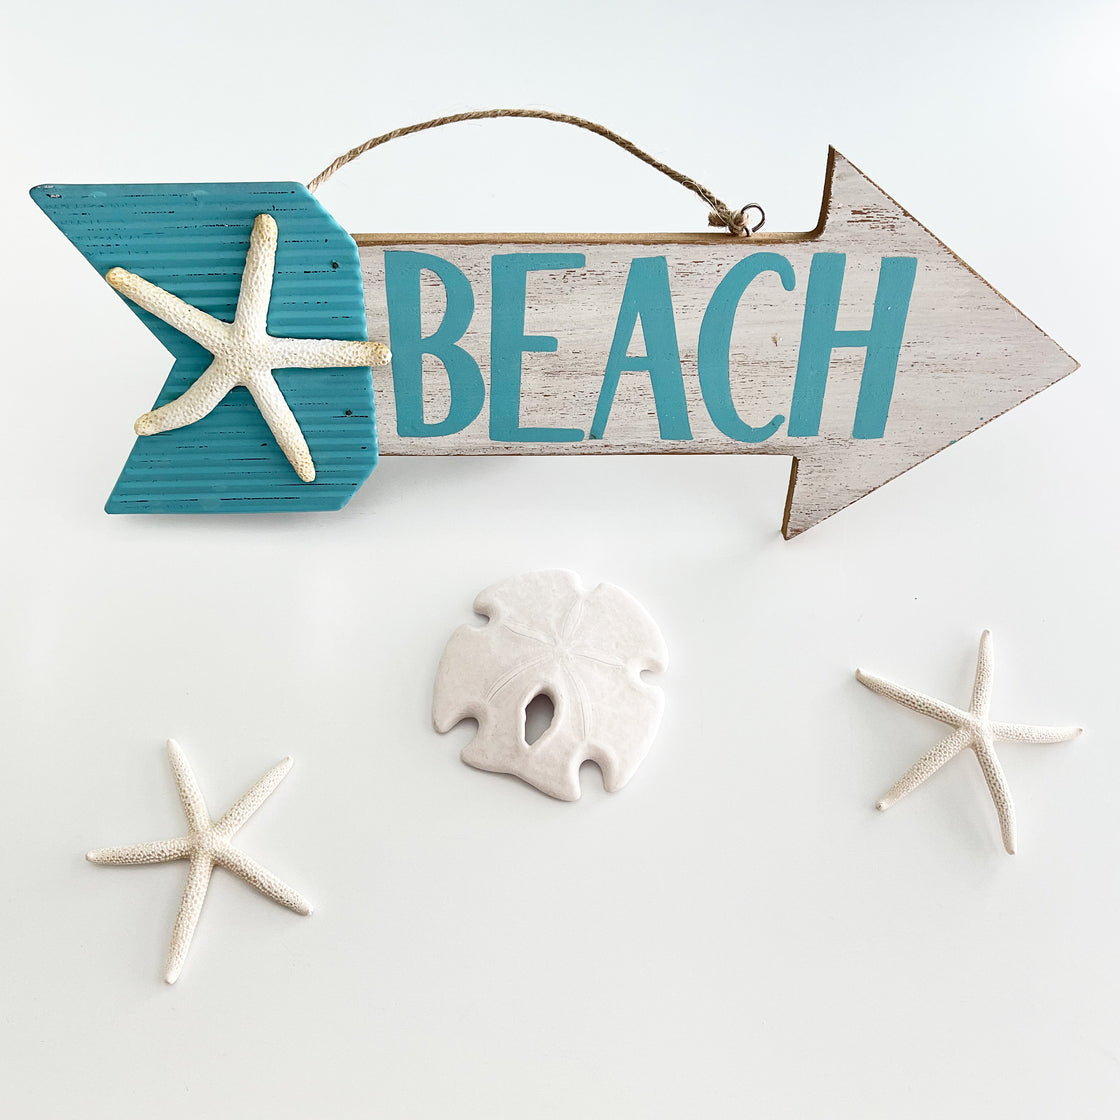 A Teal Blue Beach Arrow Wood Sign with a starfish accent and jute rope complemented by sea shells and dried starfish all on a clean white background by rengora